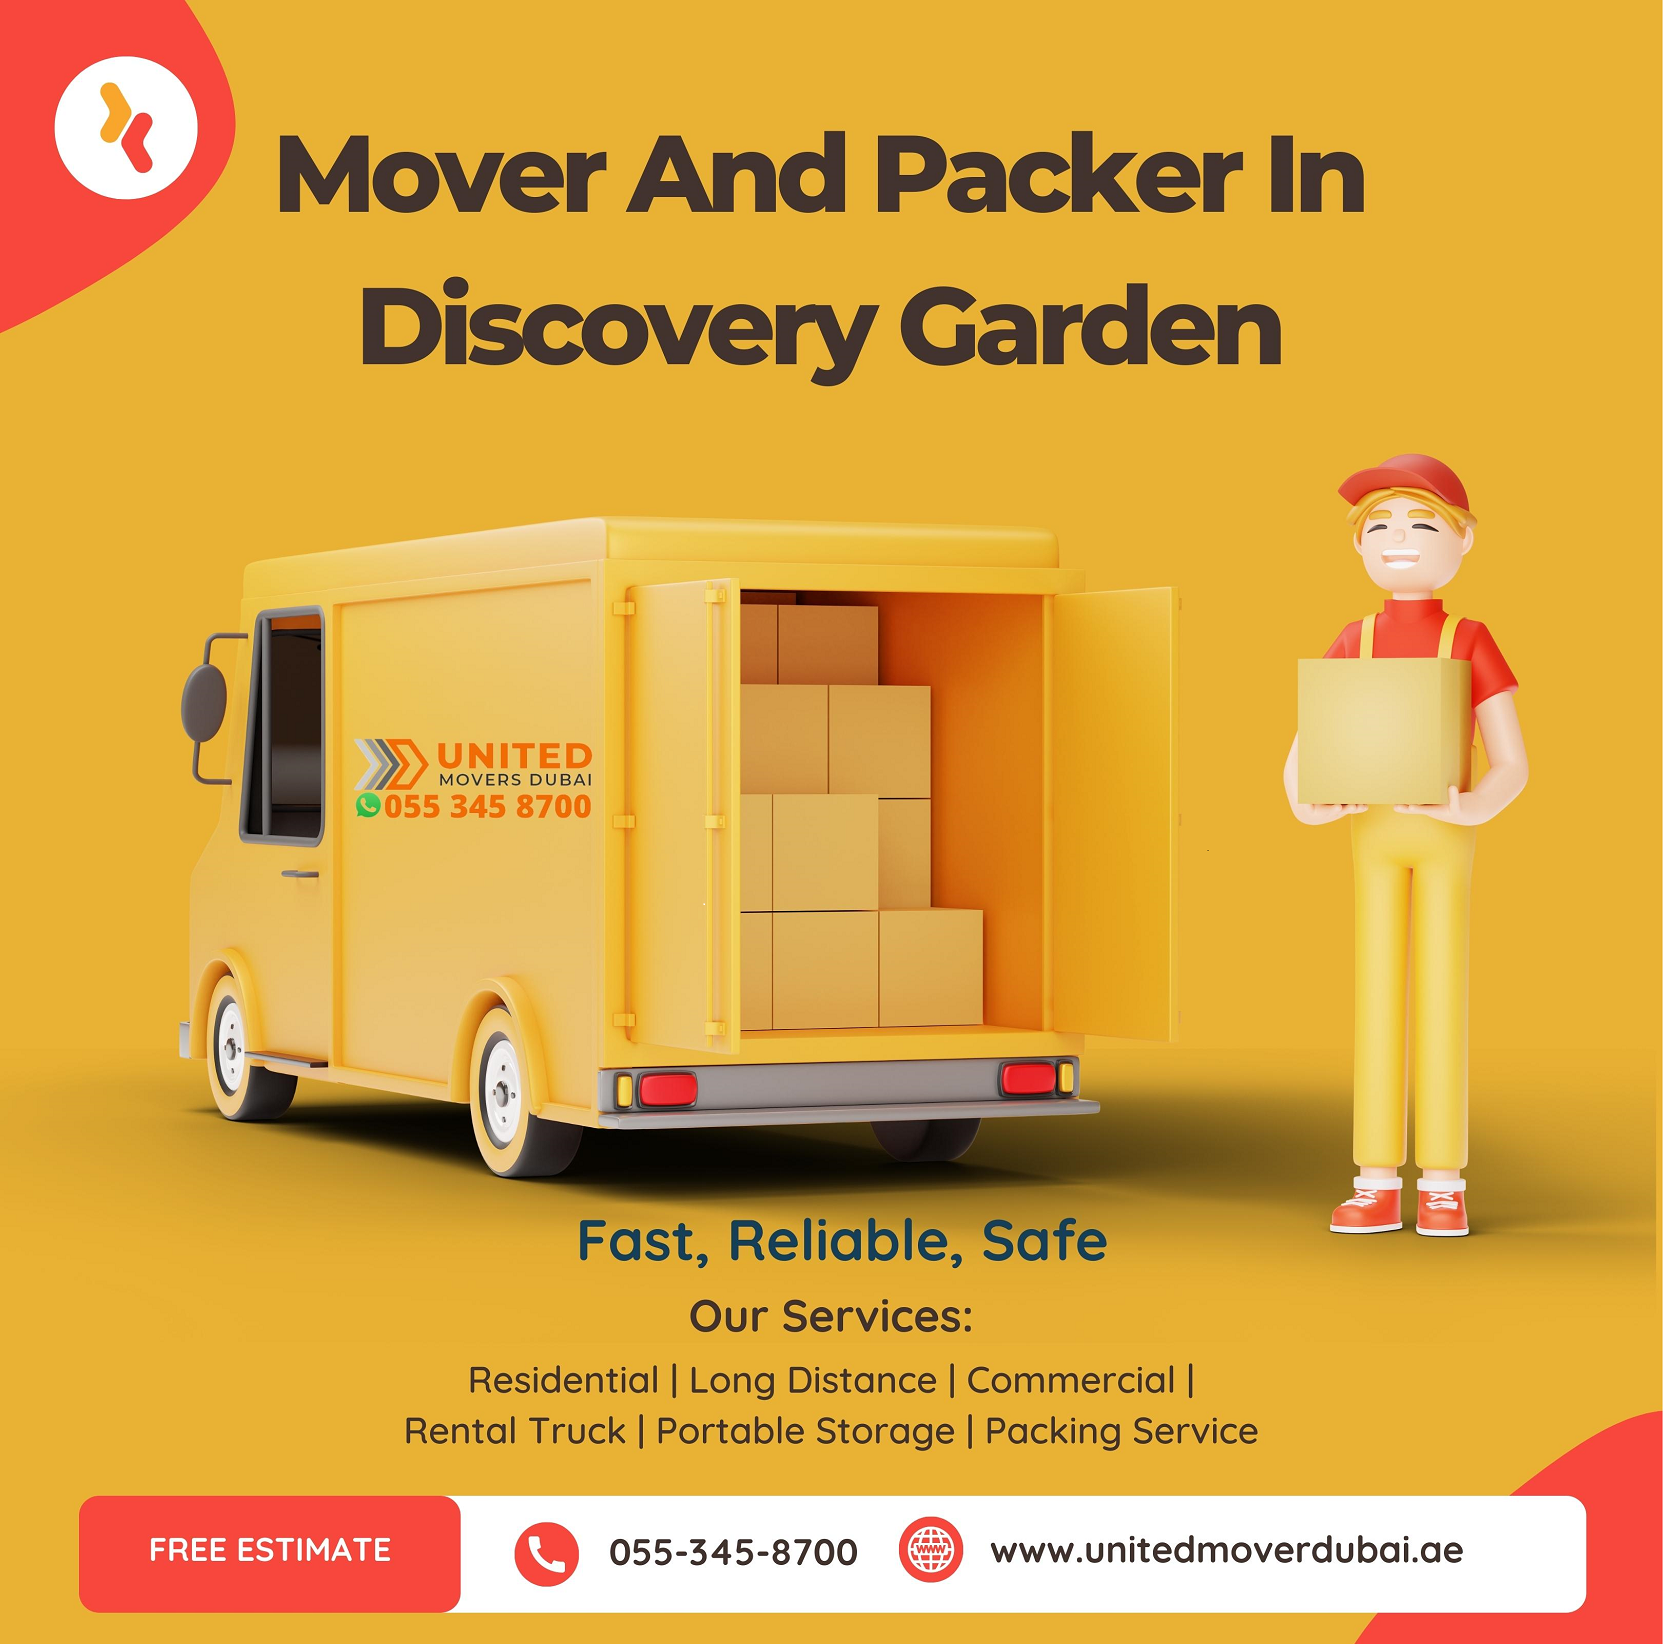 Mover And Packer In Discovery Garden